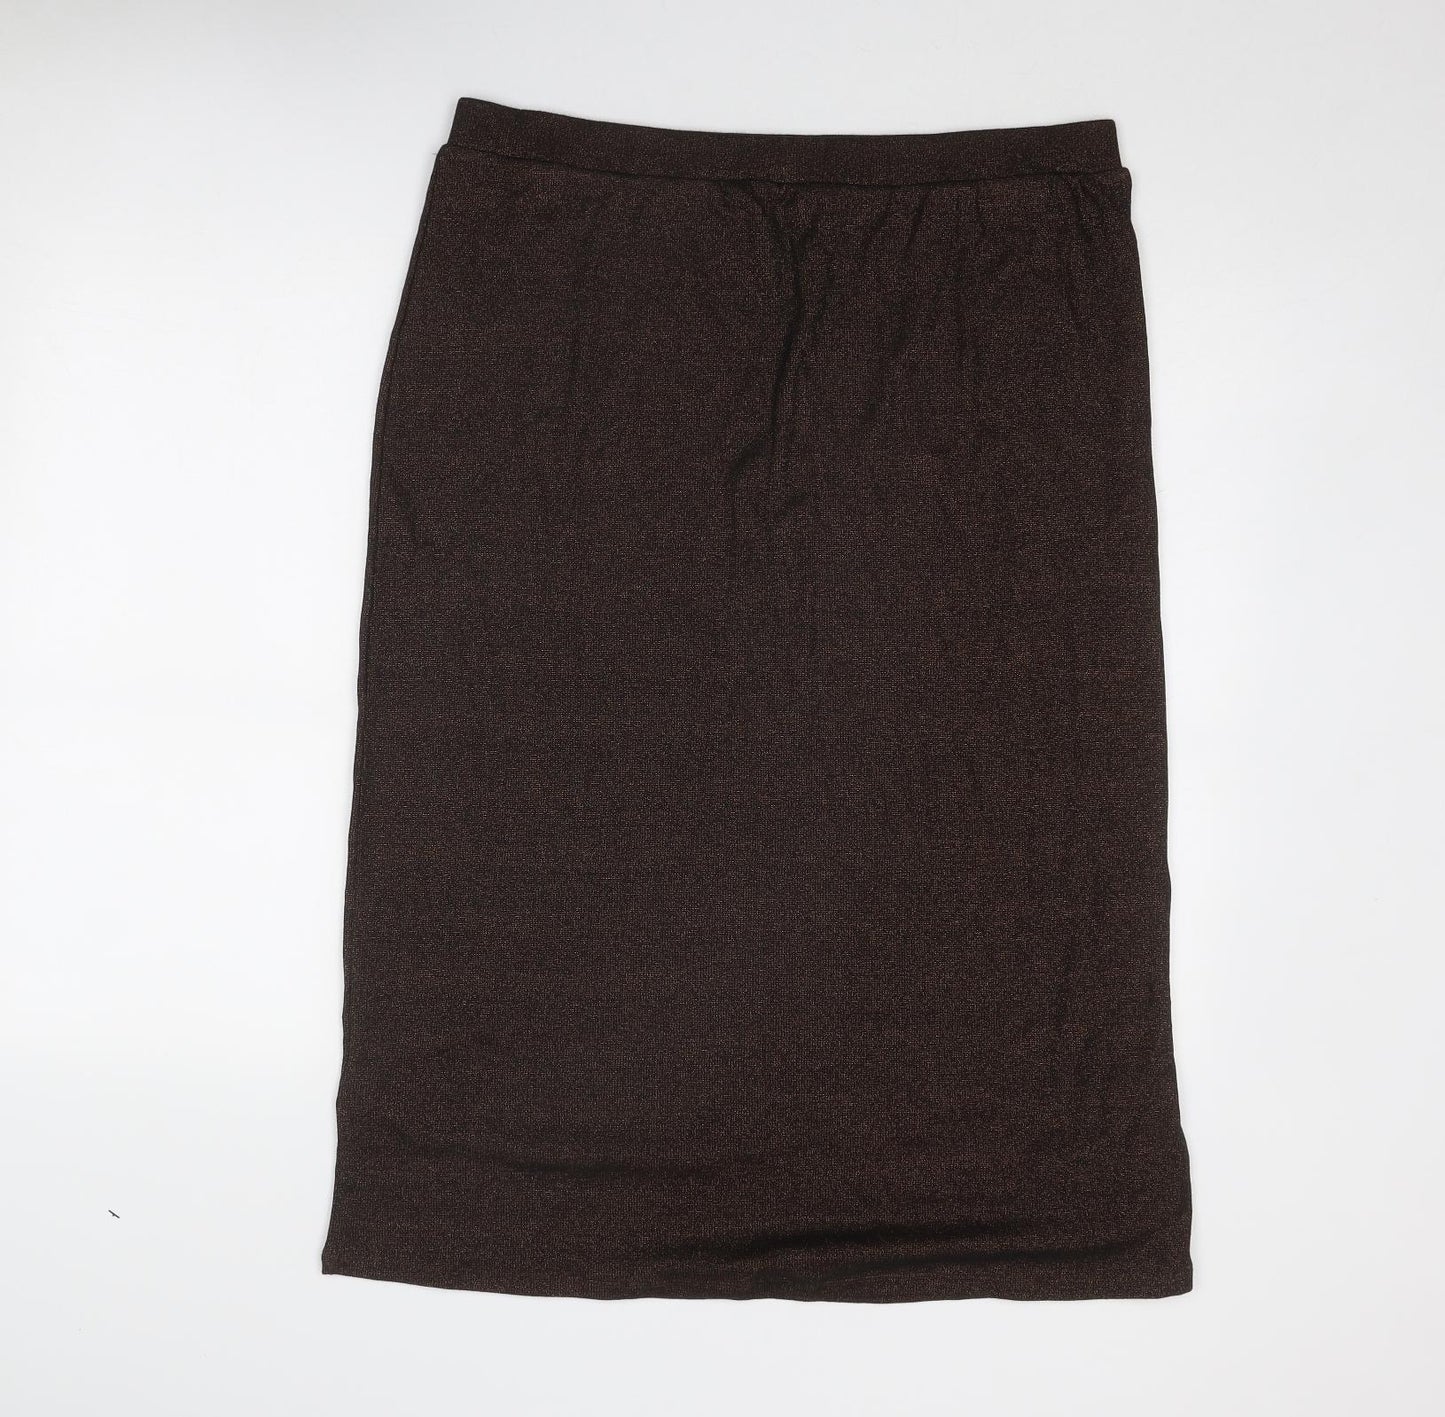 Marks and Spencer Womens Brown Cotton A-Line Skirt Size 18